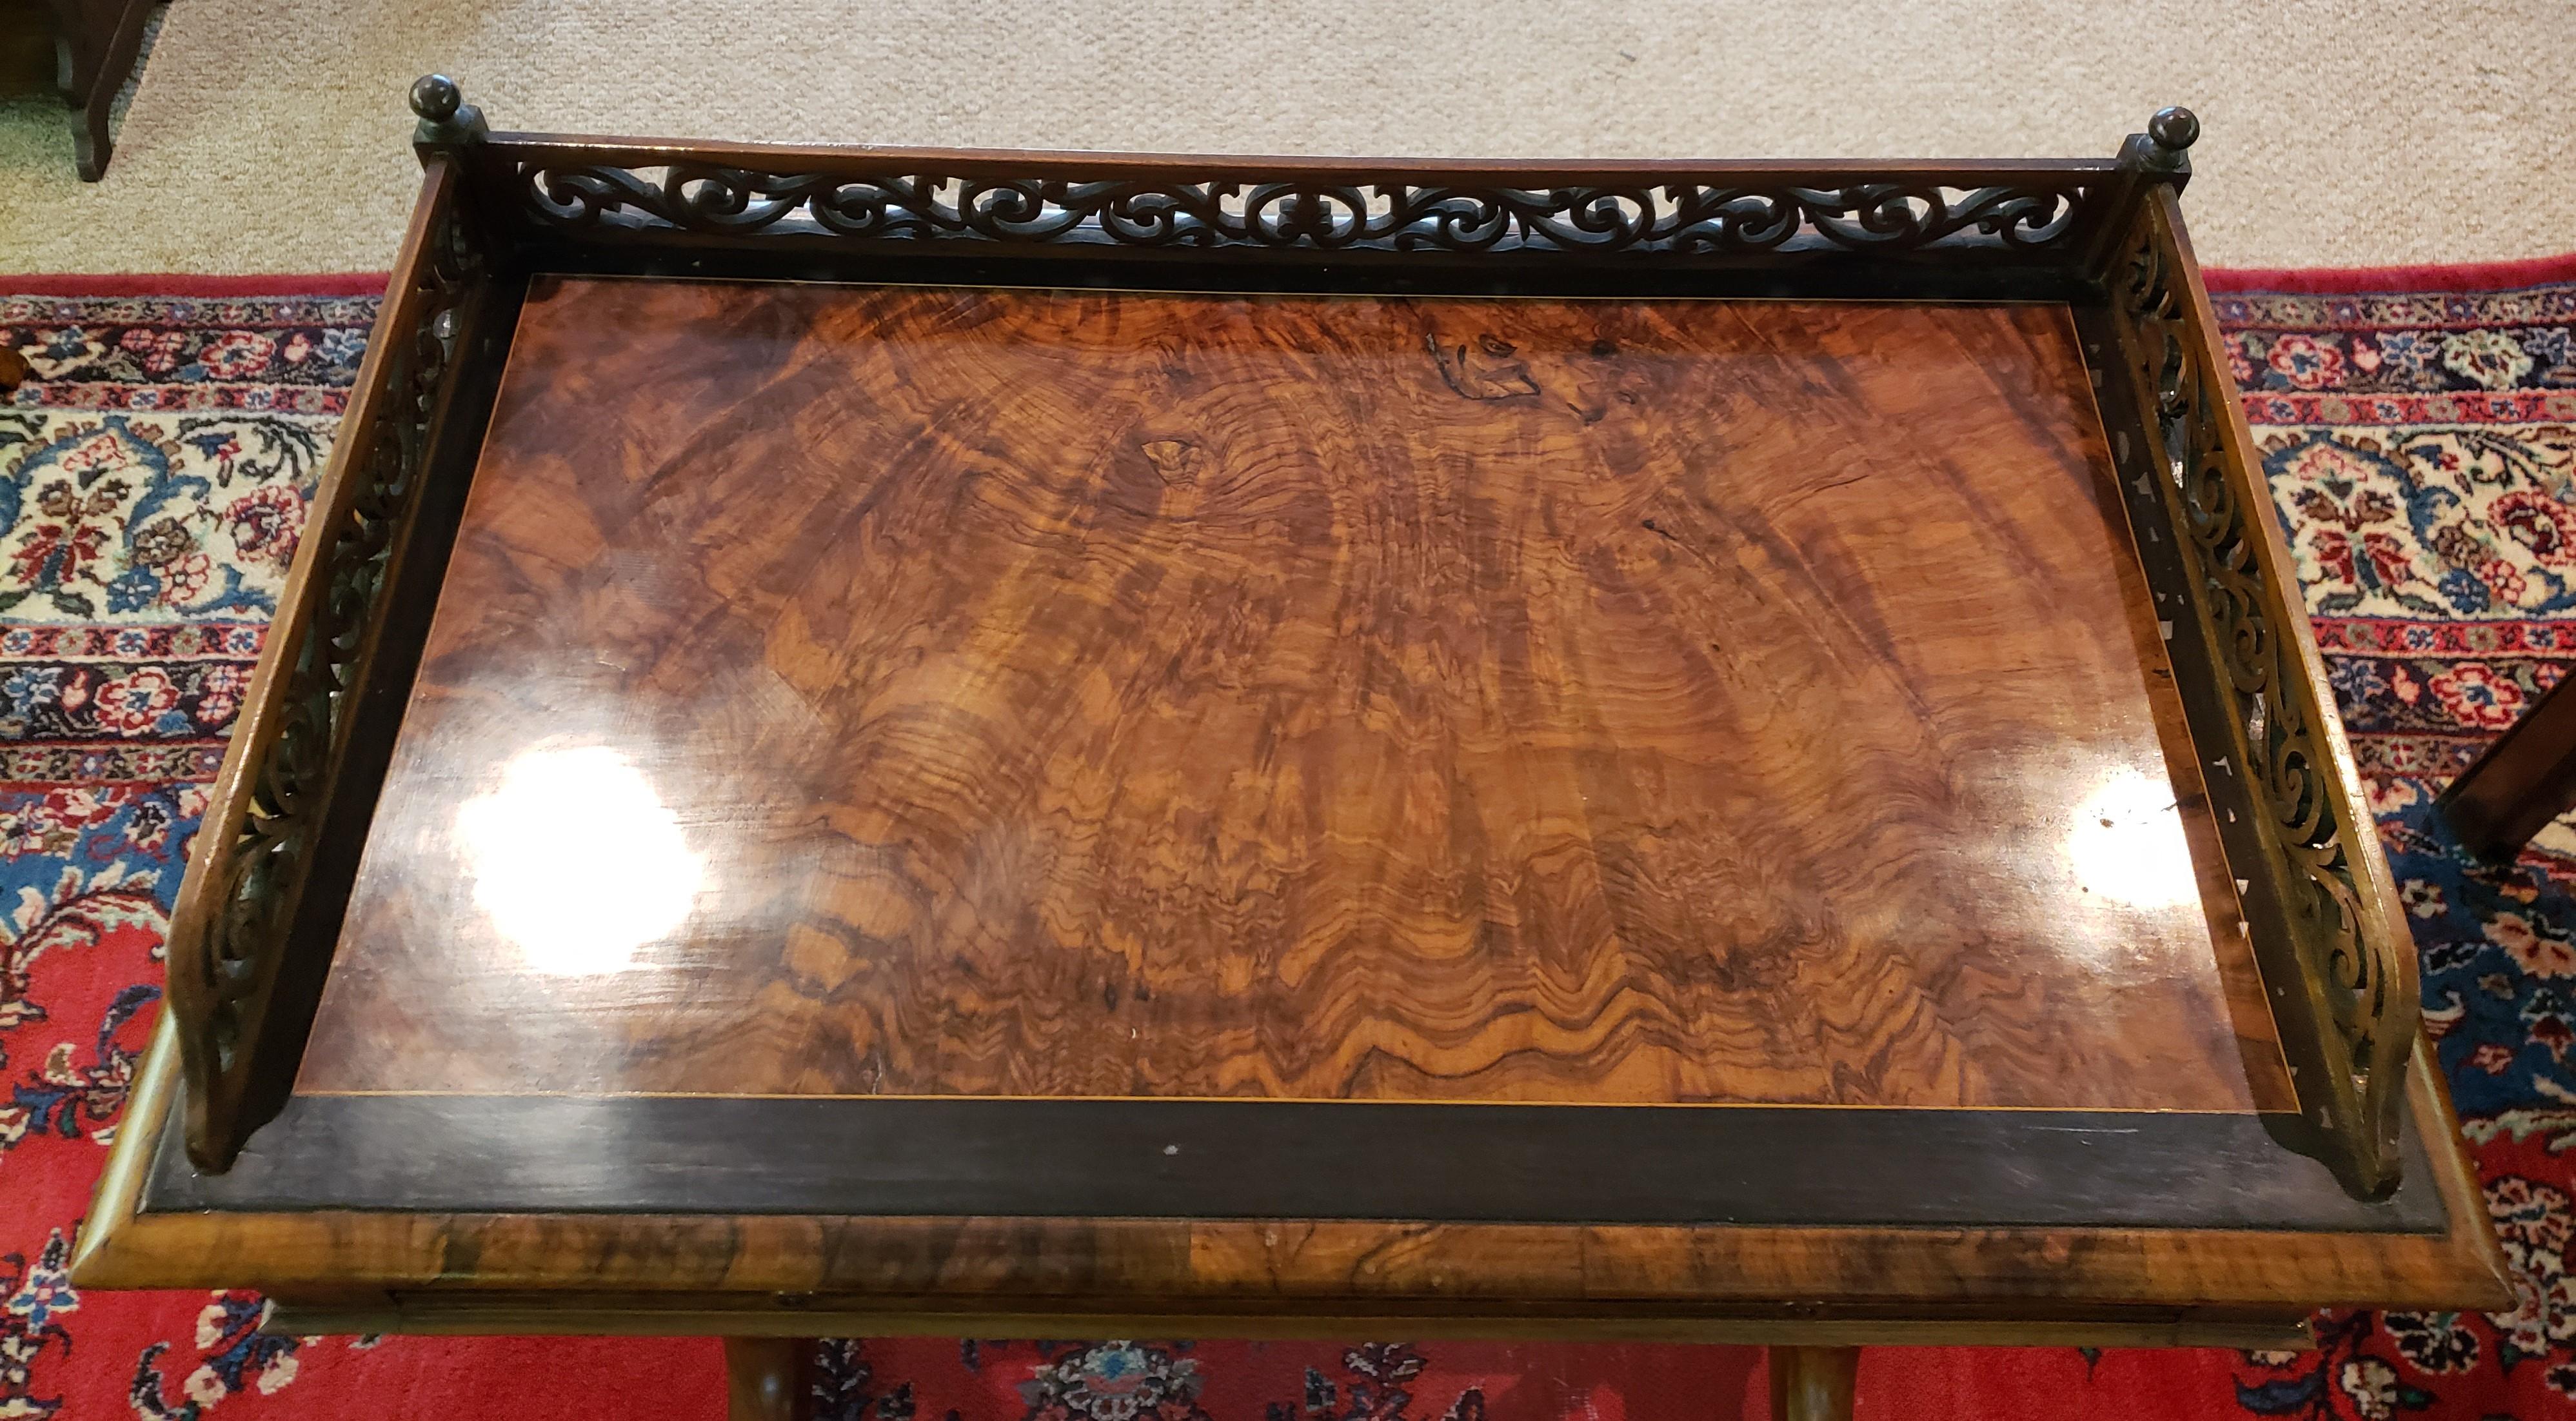 Victorian walnut sewing table featuring carved gallery, ebonized wood, and barley twist legs with castors on the feet.